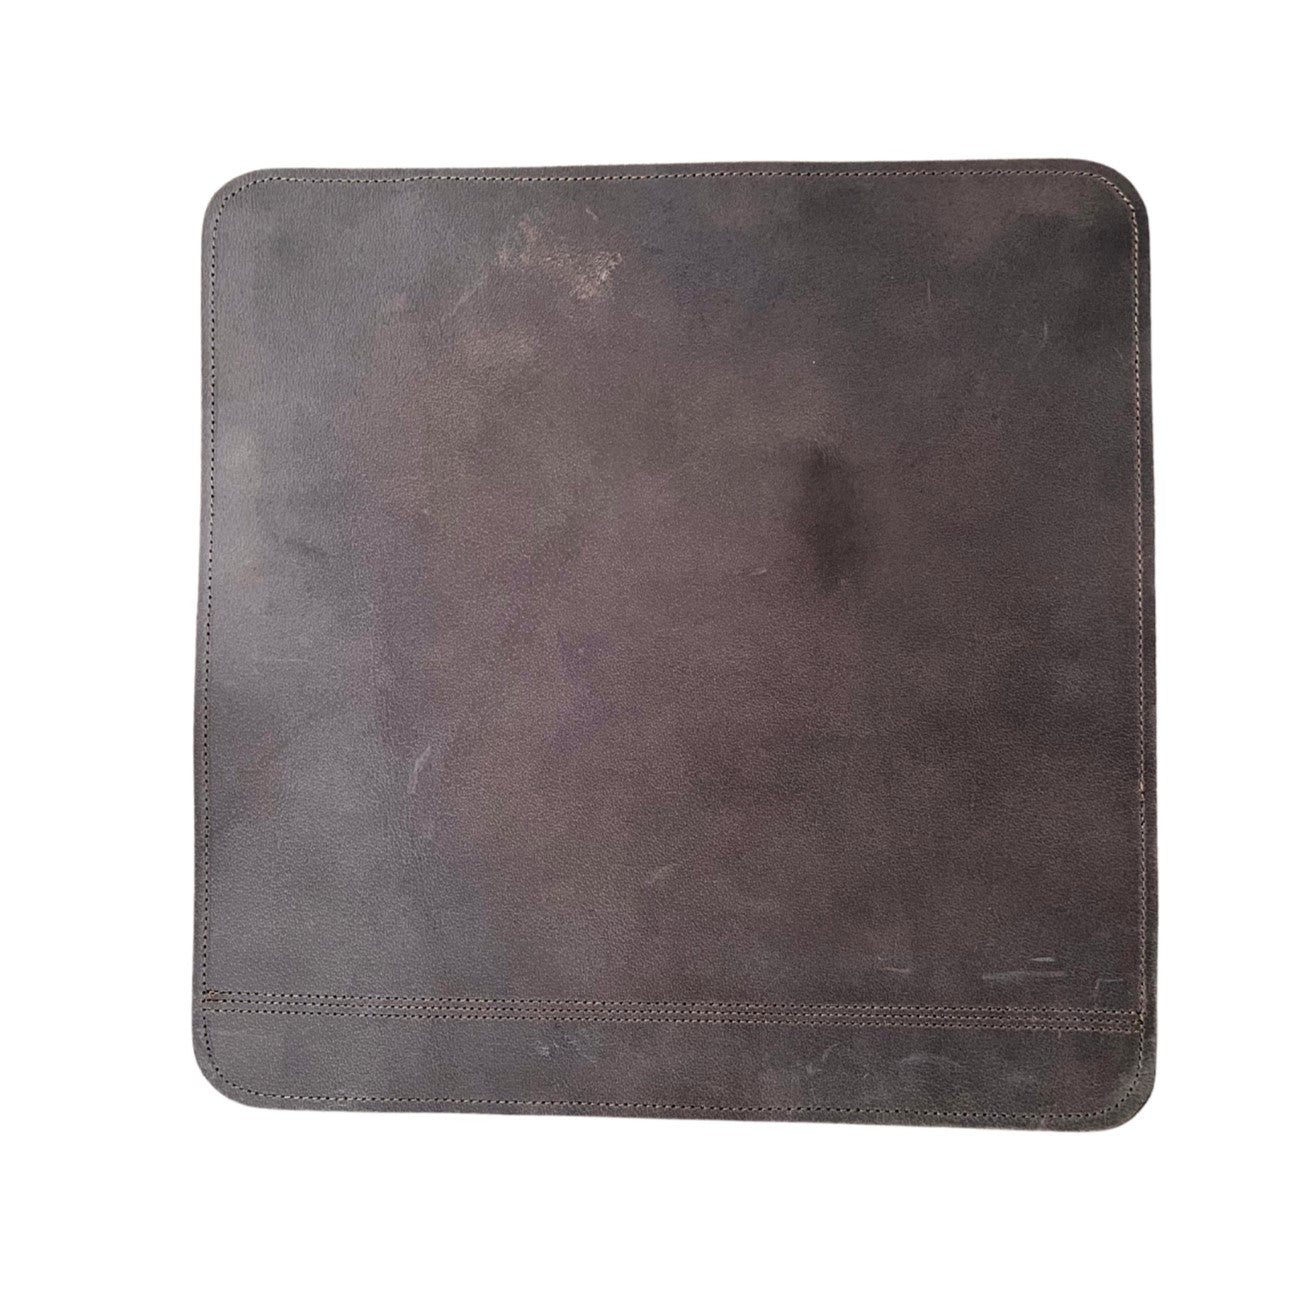 A worn-out dark gray buffalo leather dinner mat with visible scratches and scuff marks. It features a simple square design, measuring 38cm x 38cm, with stitched edges, isolated on a. Brand Name: Georgie Paws